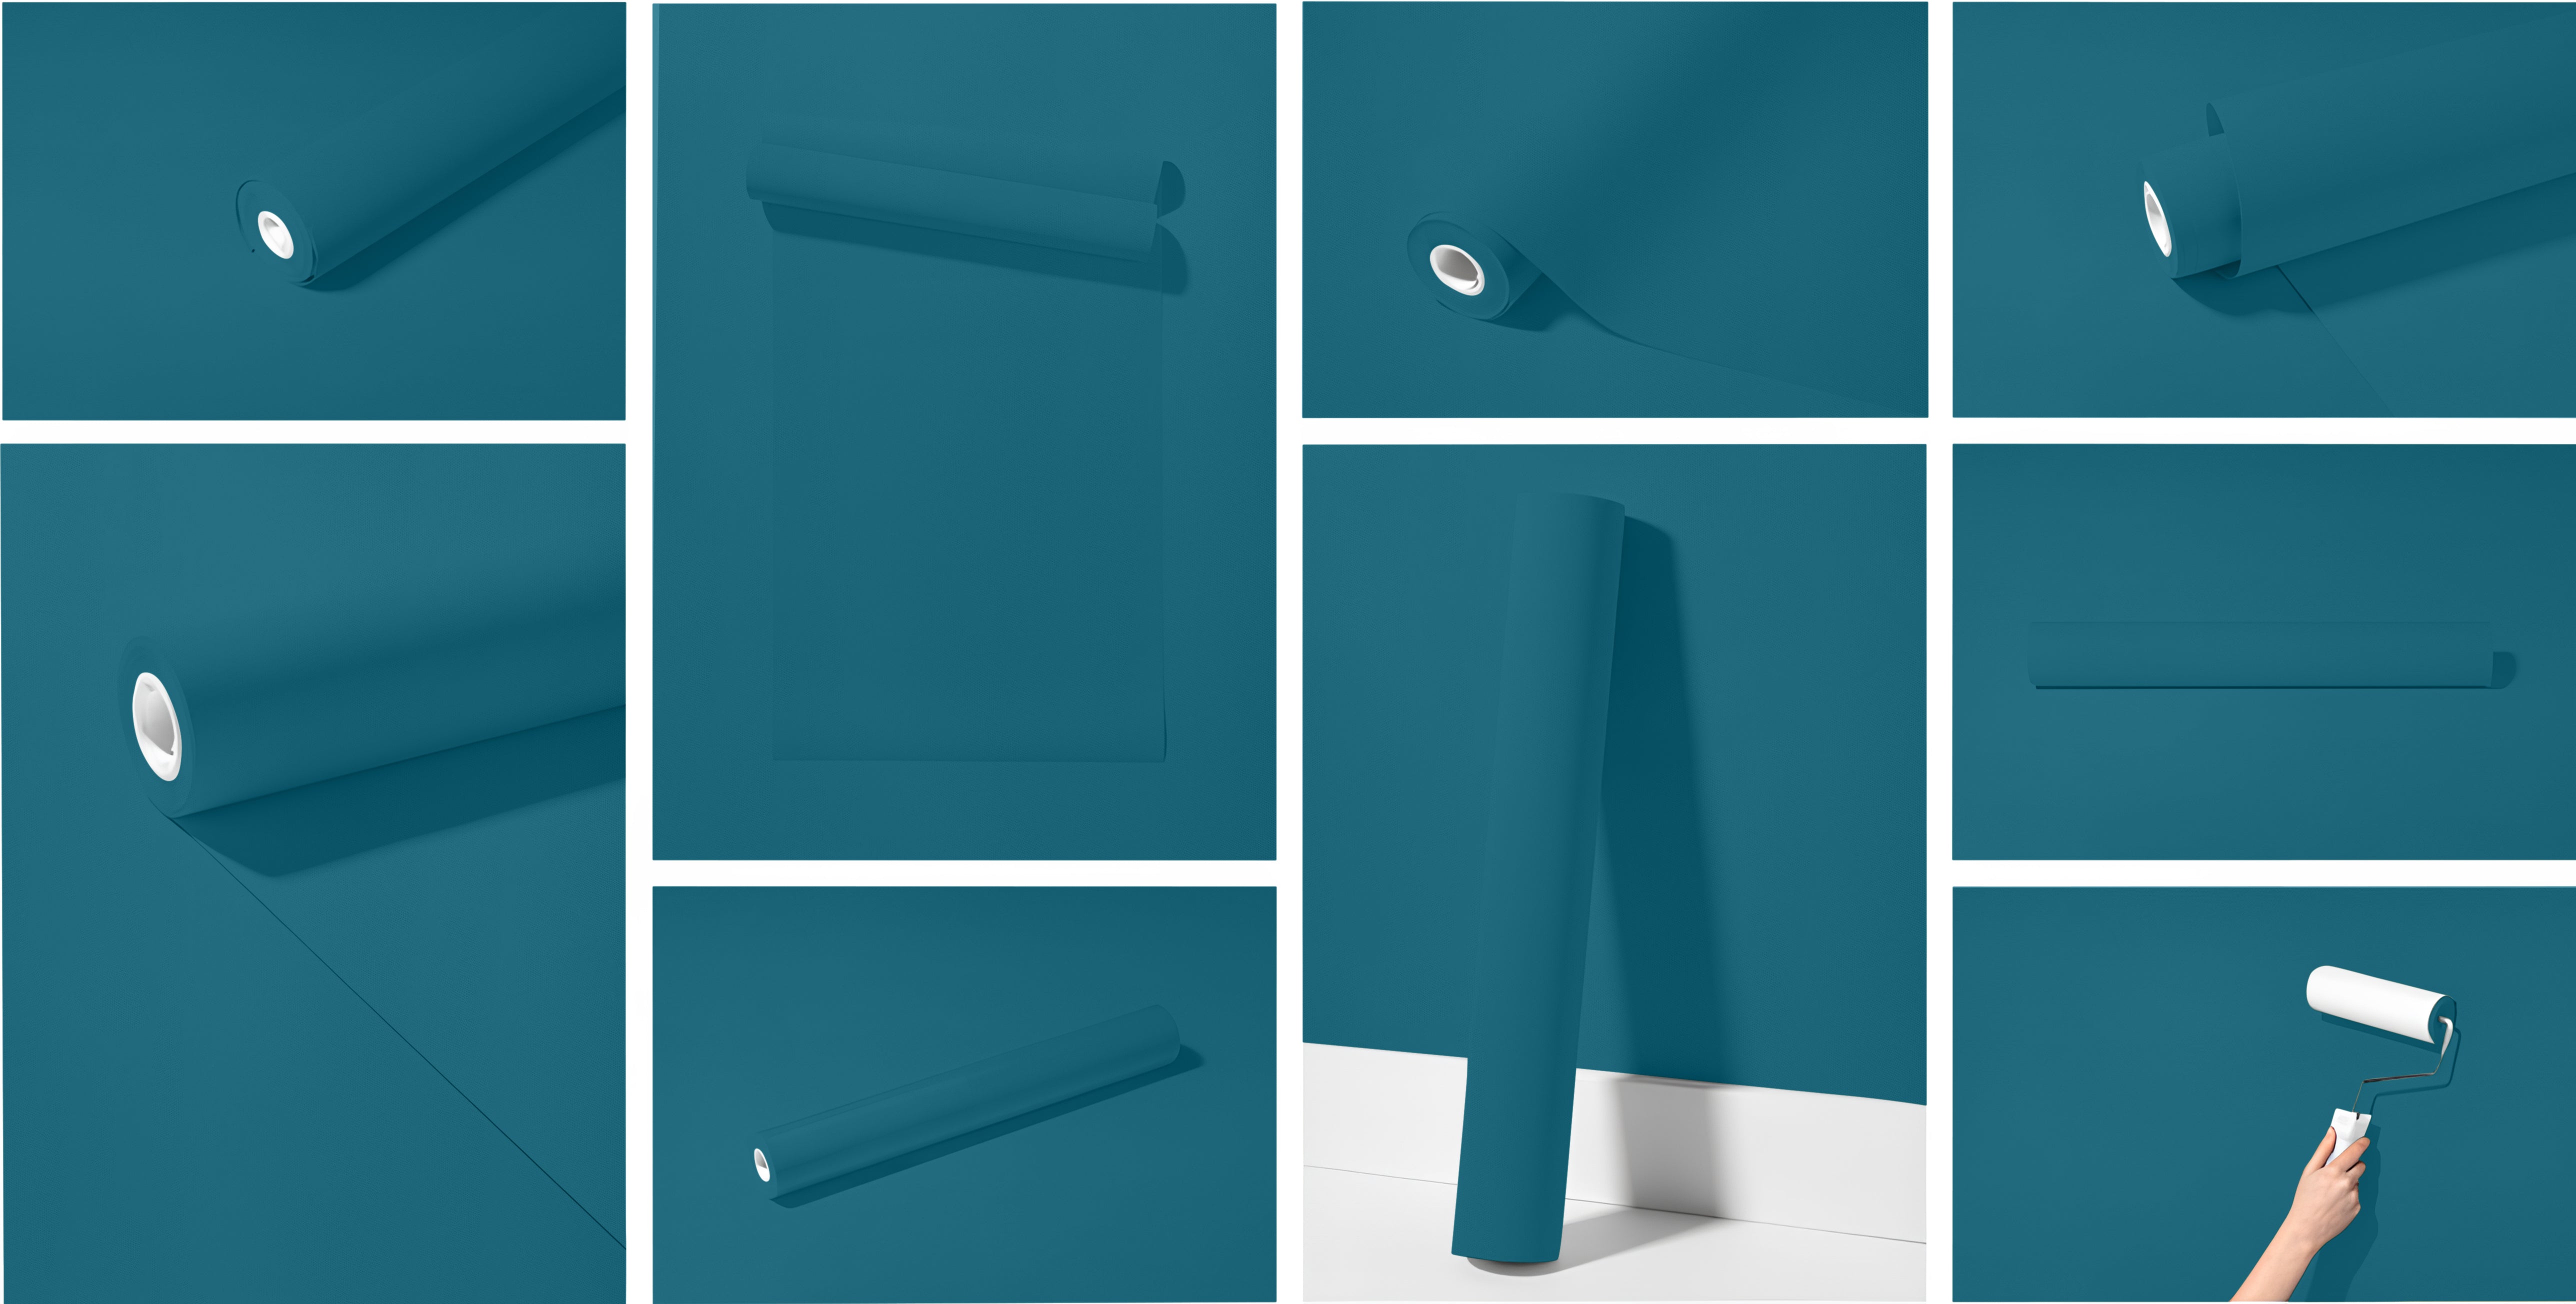 Peel & Stick Removable Re-usable Paint - Color RAL 5025 Pearl Gentian Blue - offRAL™ - RALRAW LLC, USA